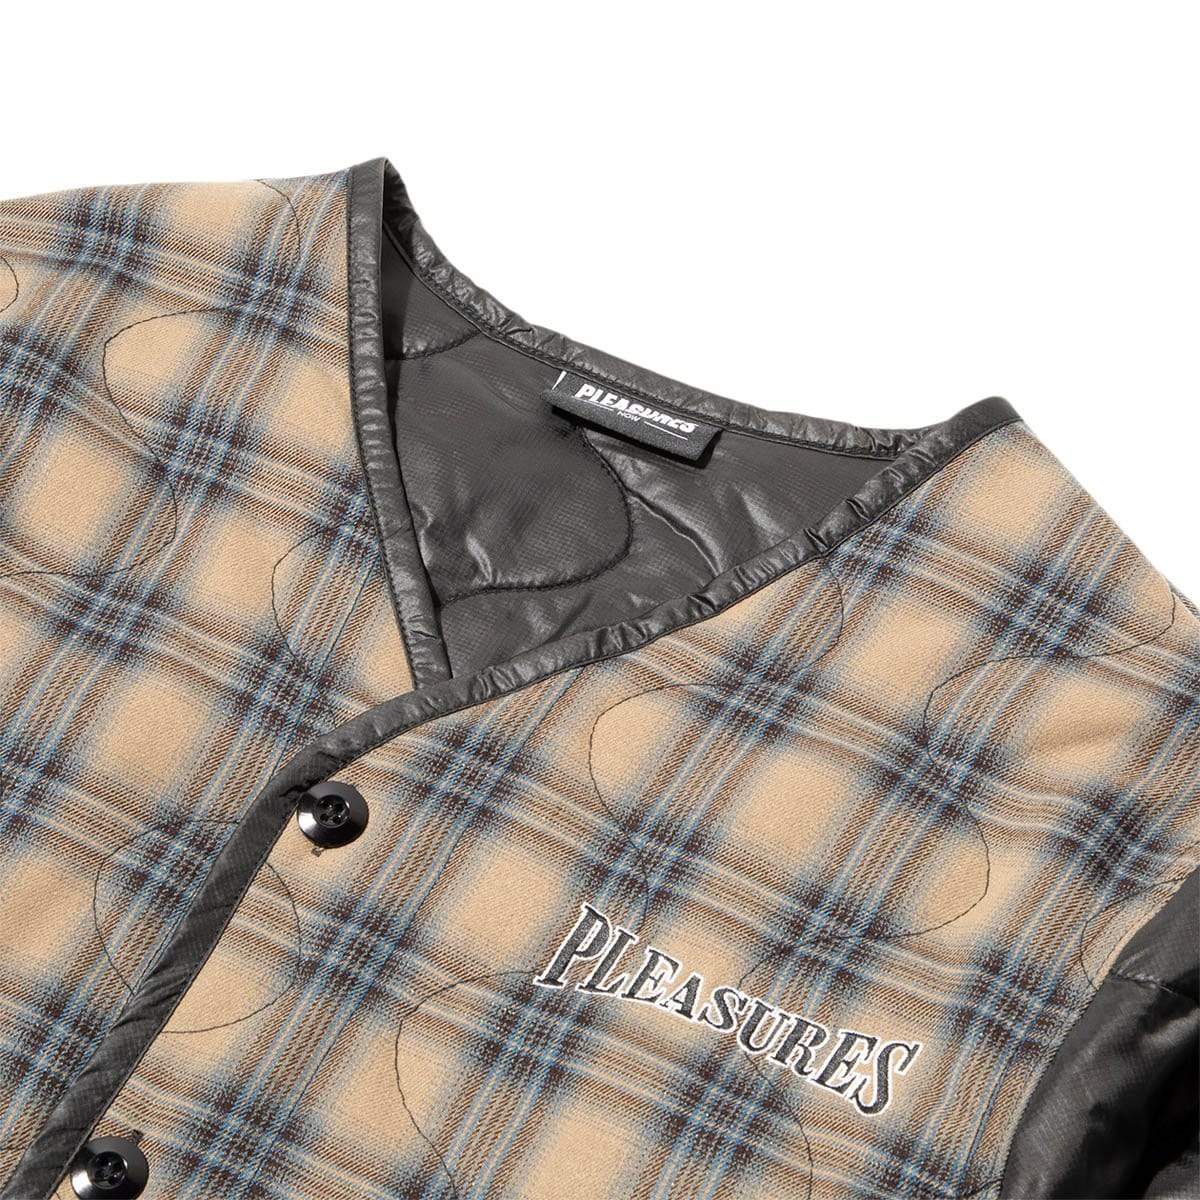 Pleasures Outerwear BOWERY PLAID LINER JACKET